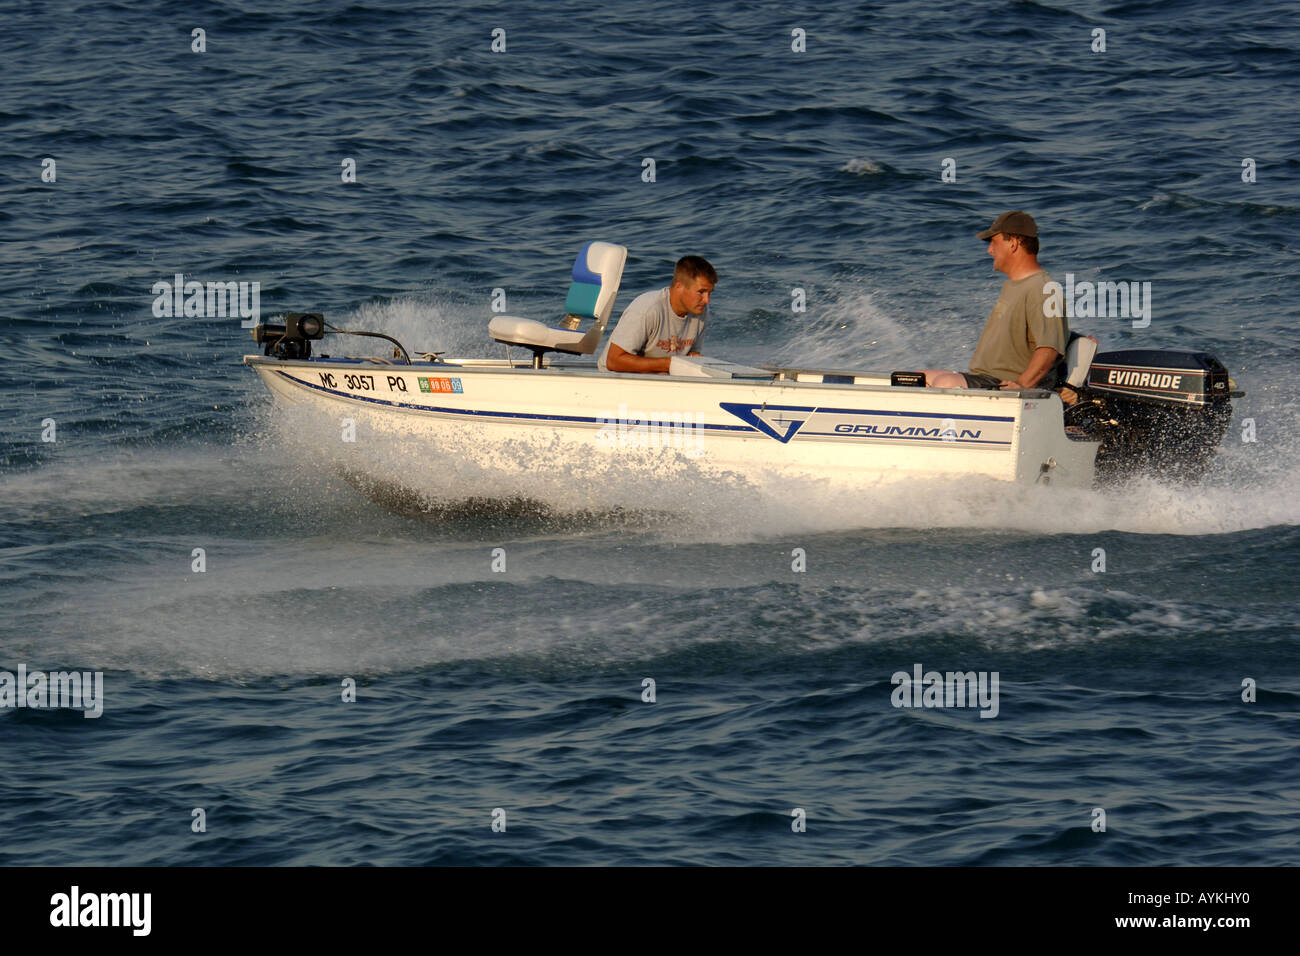 https://c8.alamy.com/comp/AYKHY0/small-two-man-fishing-boat-with-an-outboard-motor-on-the-st-clair-AYKHY0.jpg